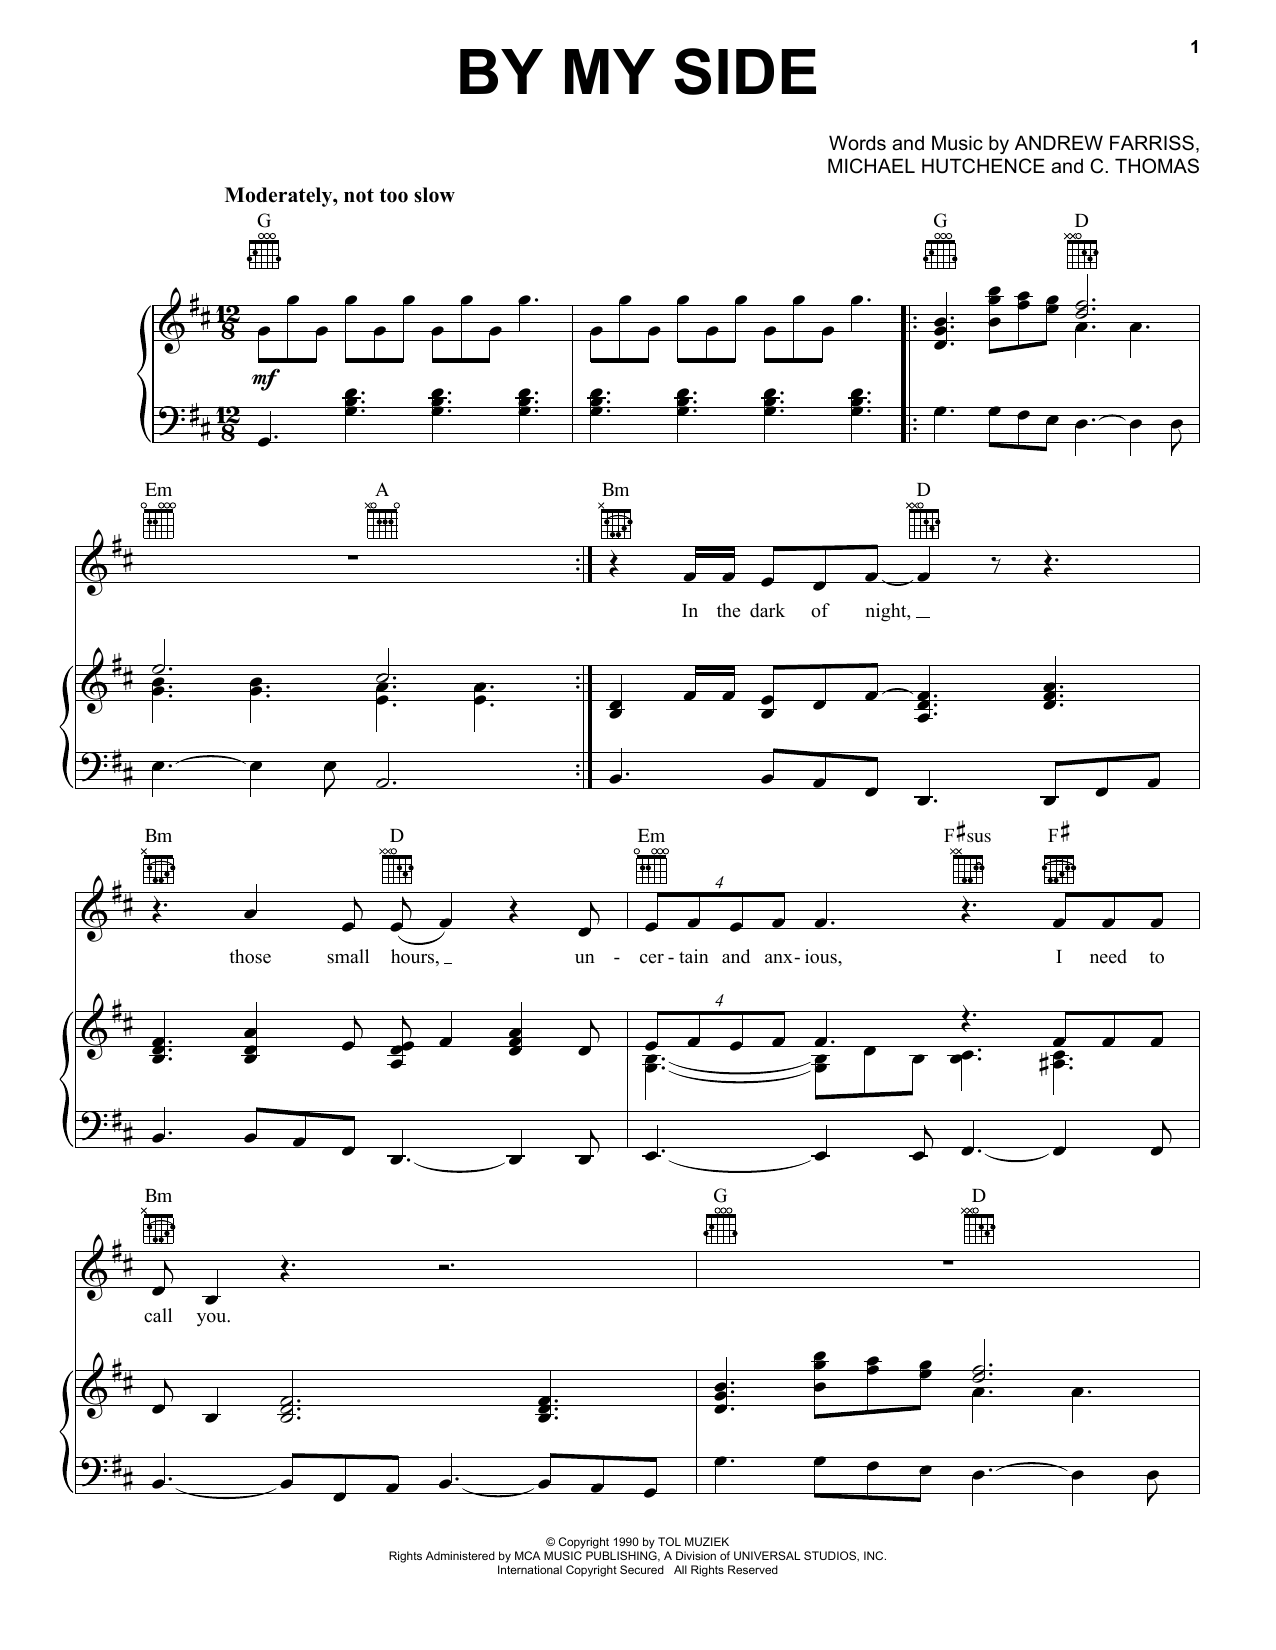 INXS By My Side sheet music notes printable PDF score